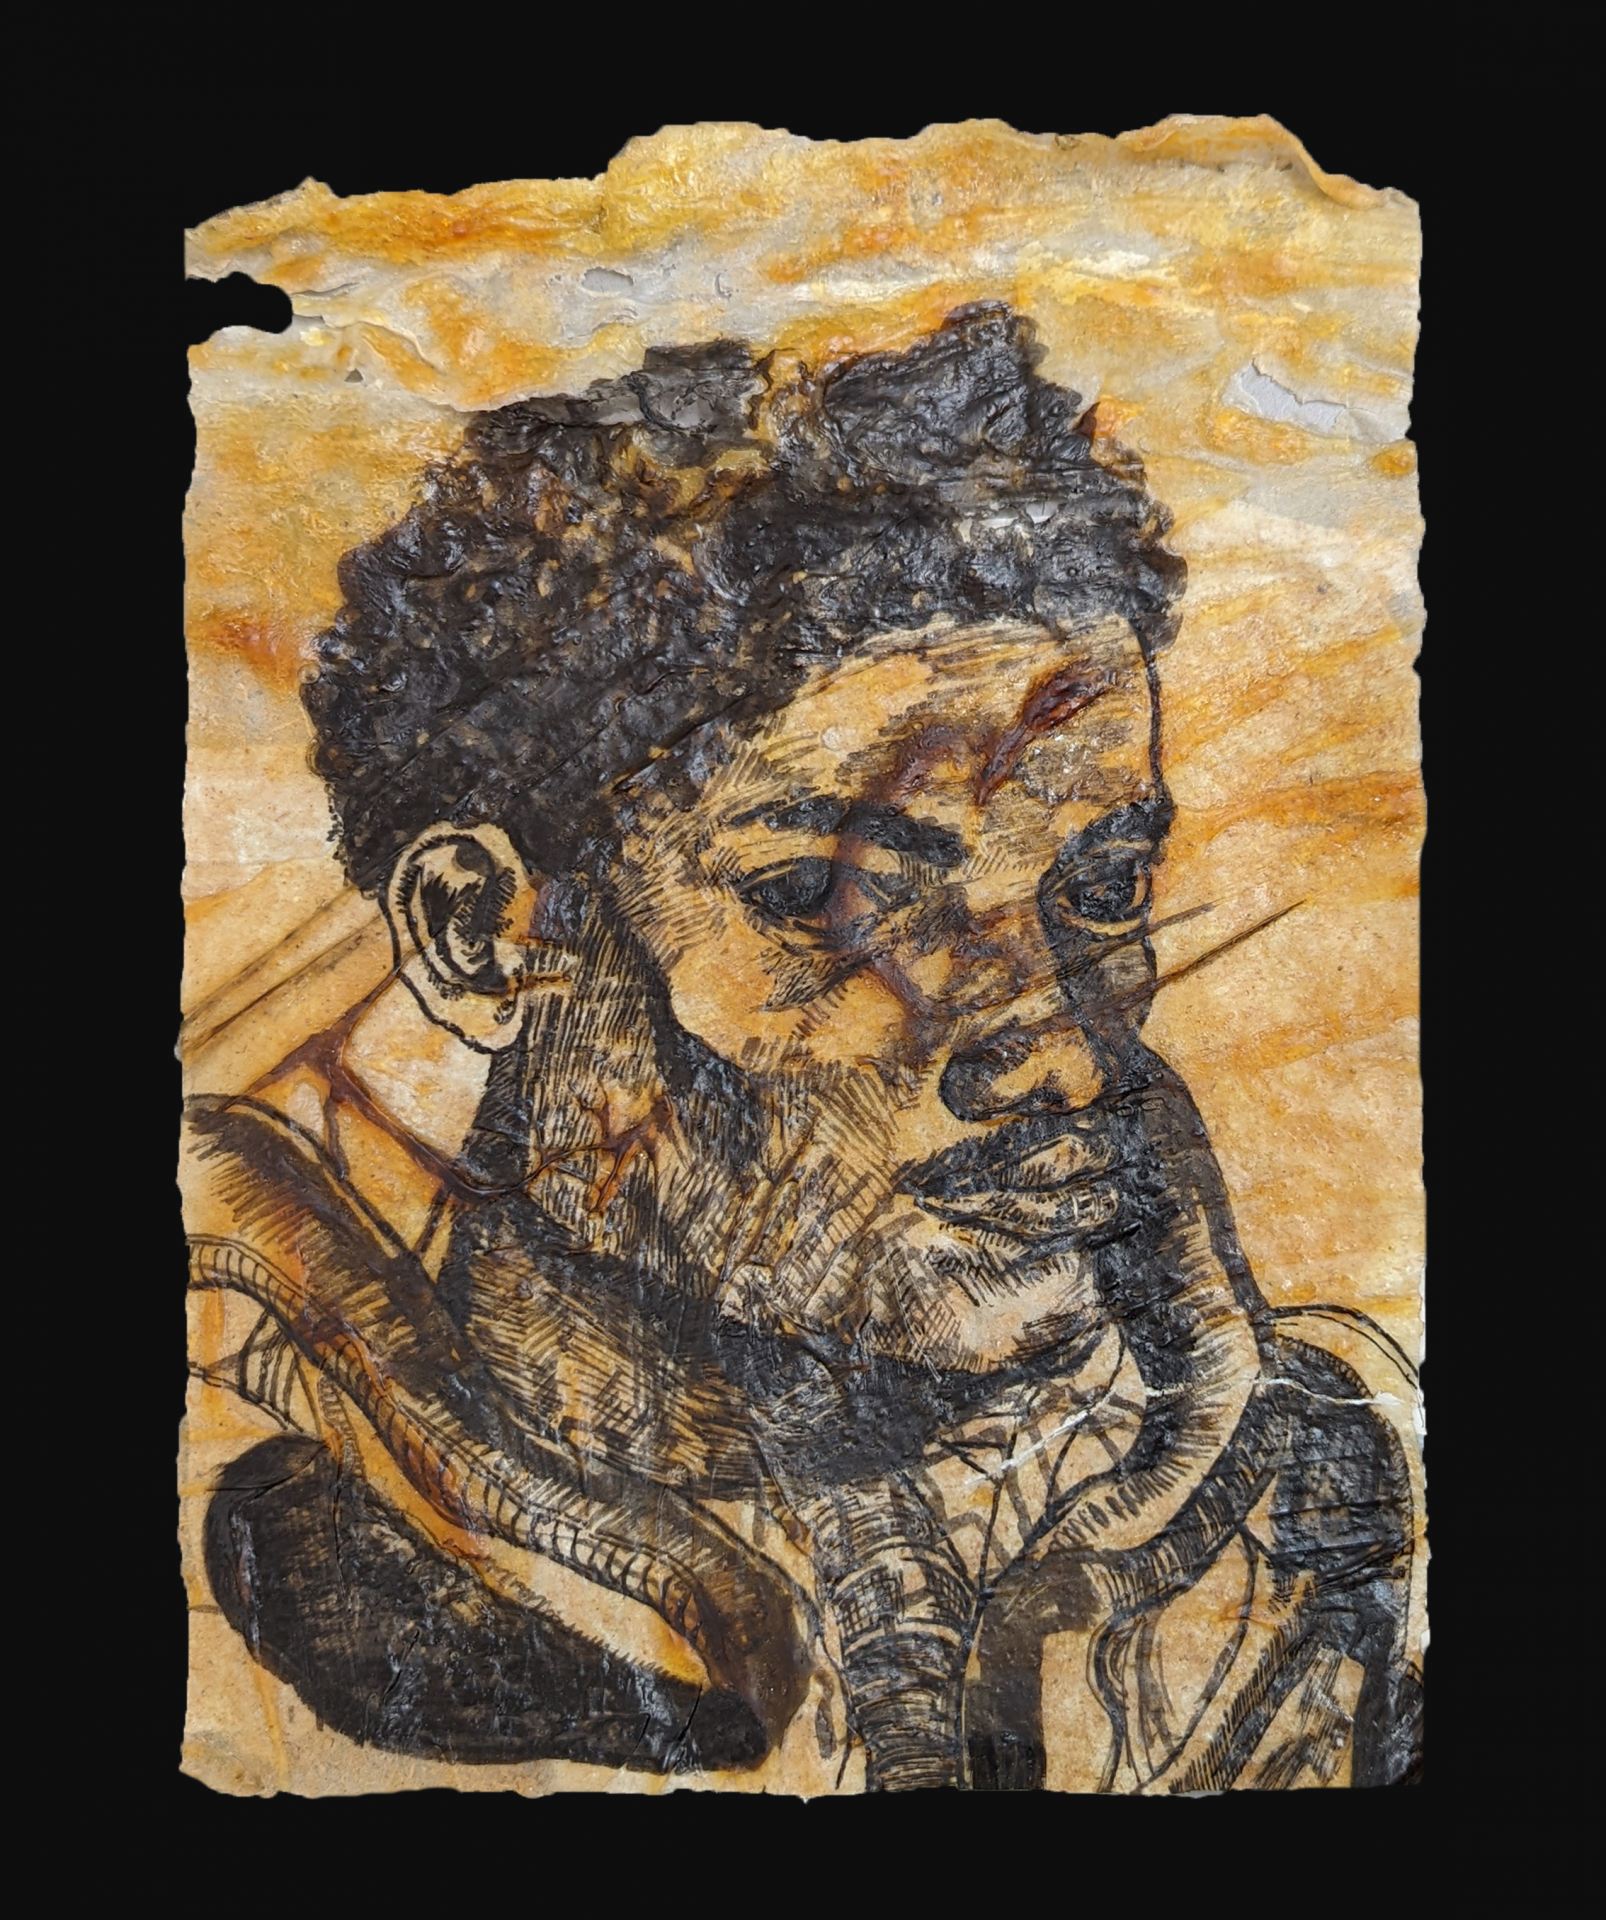 Portrait drawn in black ink on yellow latex of a man with a snake around his neck.